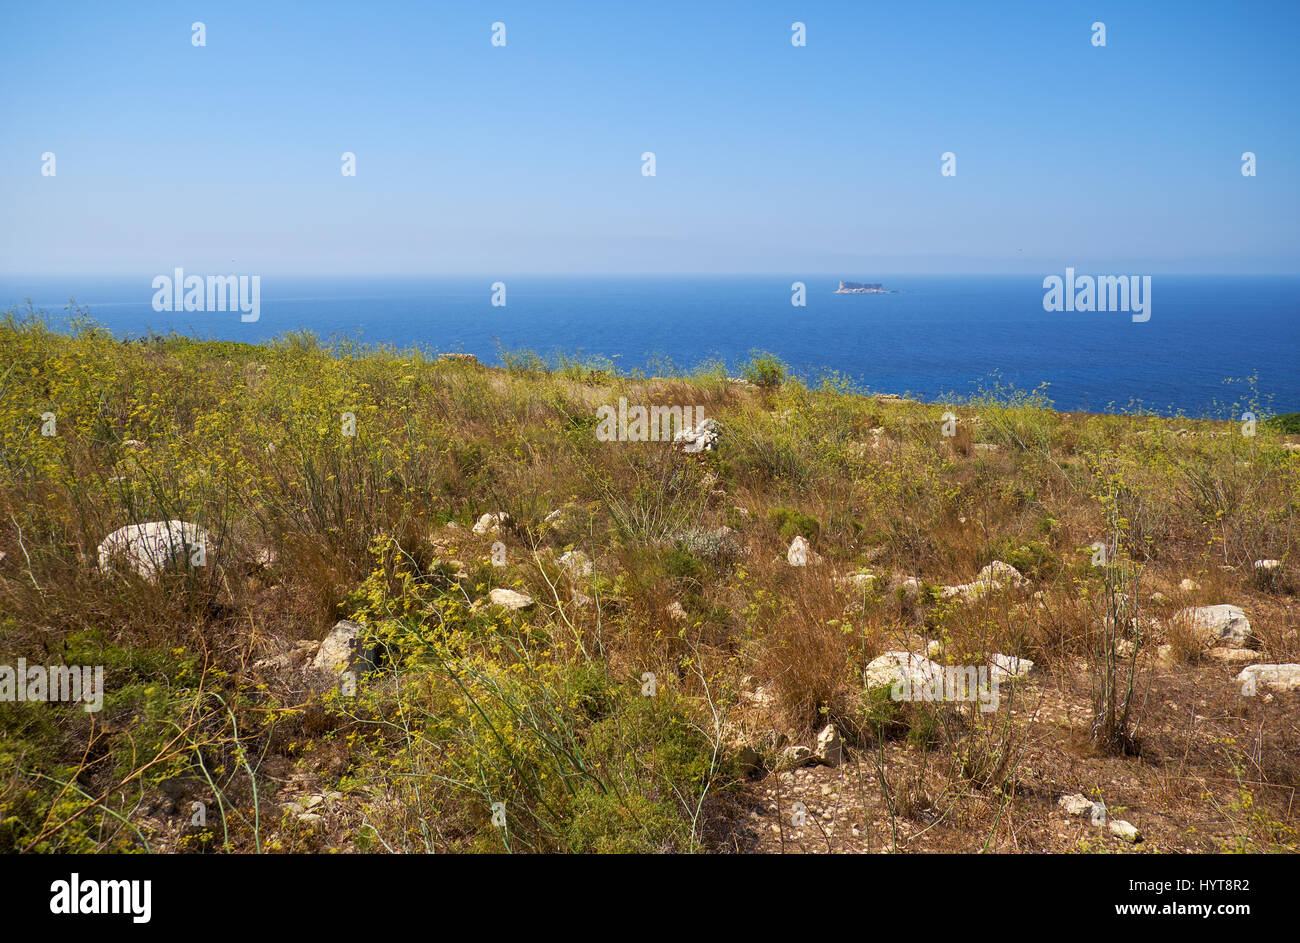 The view of Qrendi coast scorched earth  with the  Filfla islet on the background. Malta Stock Photo